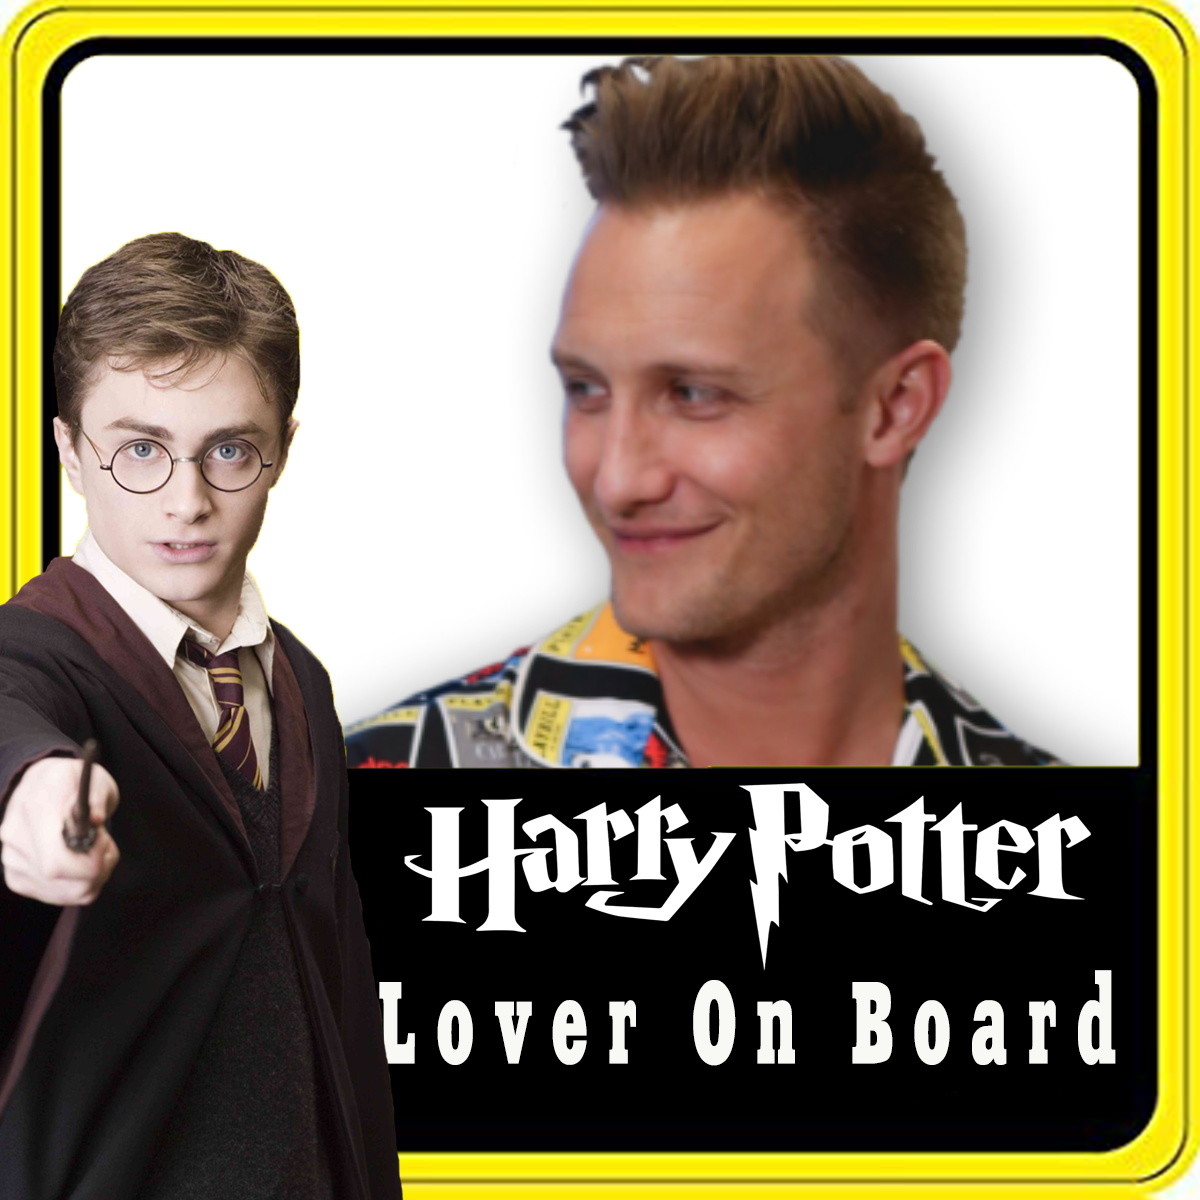 Personalised Harry Potter Lover On Board Safety Sticker Car Vinyl Stickers Decals Accessories